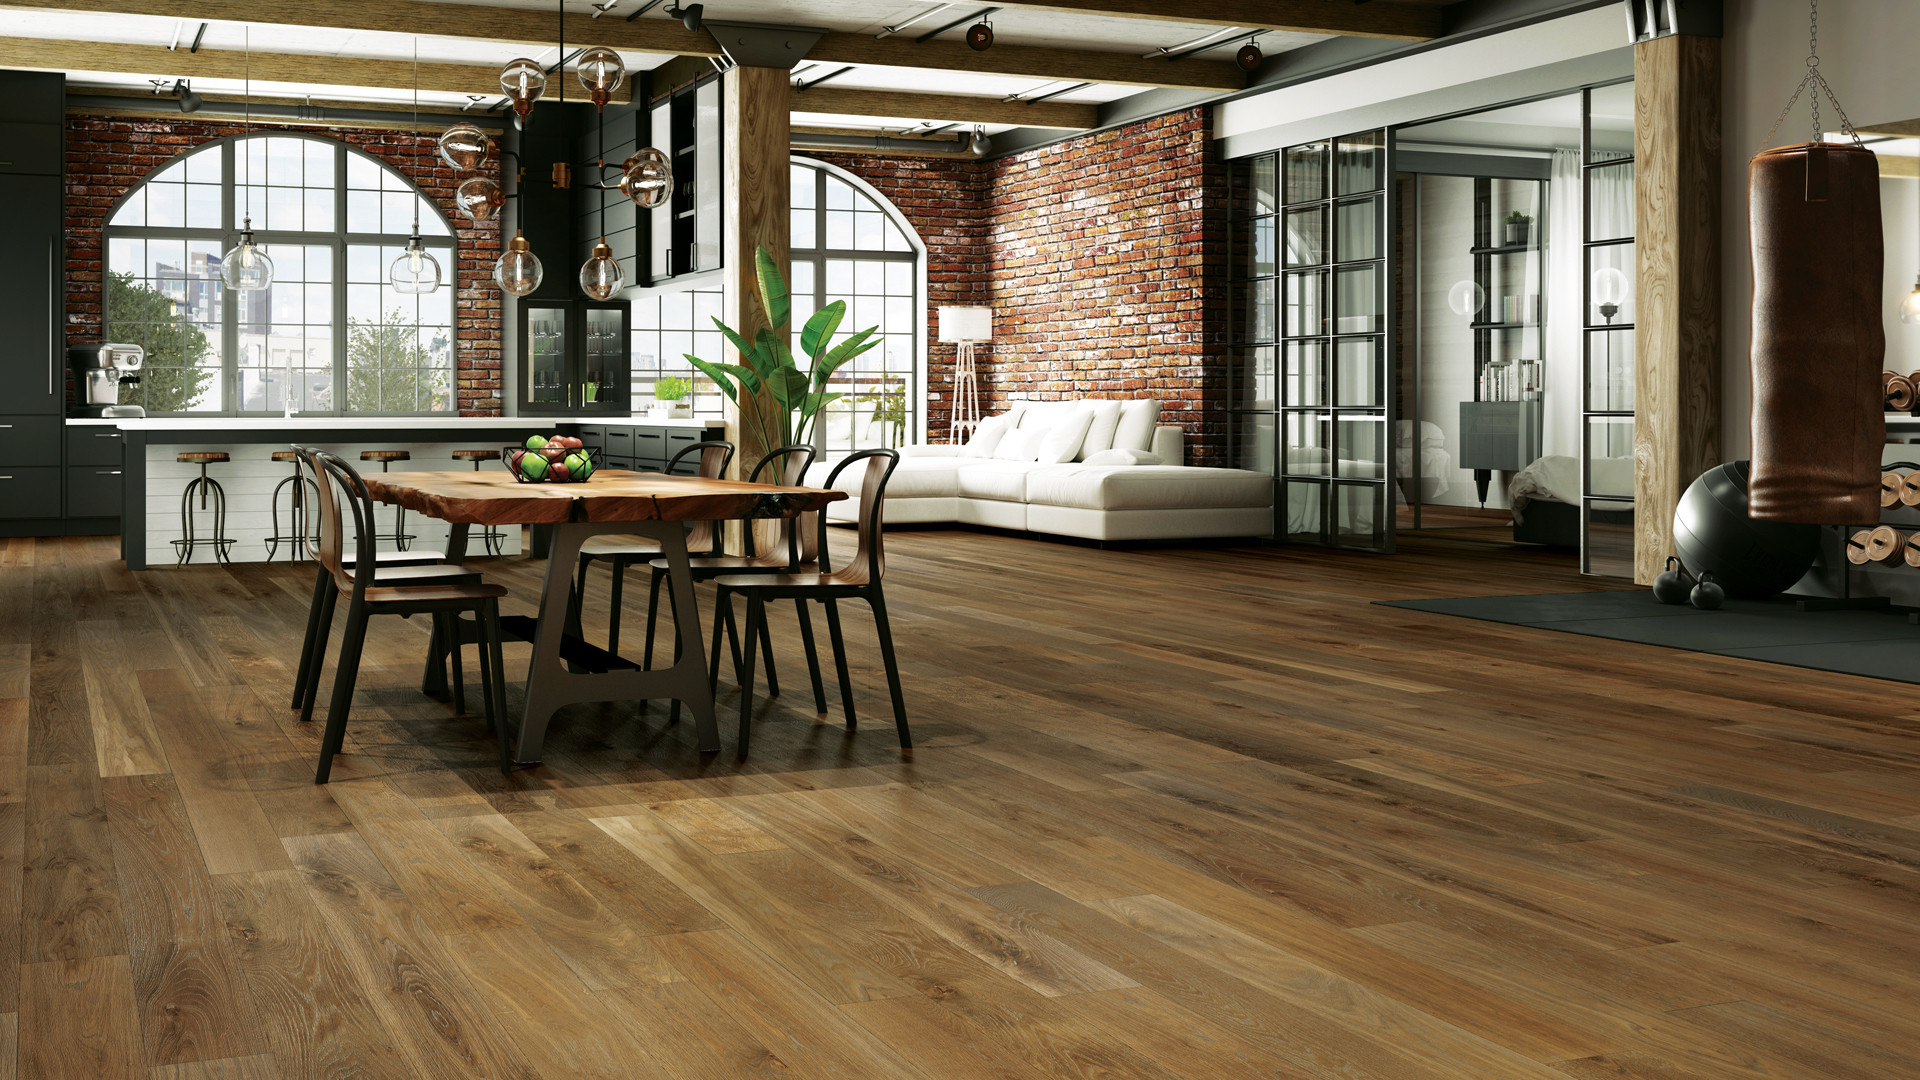 light brown hardwood floors of 4 latest hardwood flooring trends of 2018 lauzon flooring inside dark brown combined with a wire brushed texture and an ultra matte sheen these new 7a½ wide white oak hardwood floors will definitely add character to